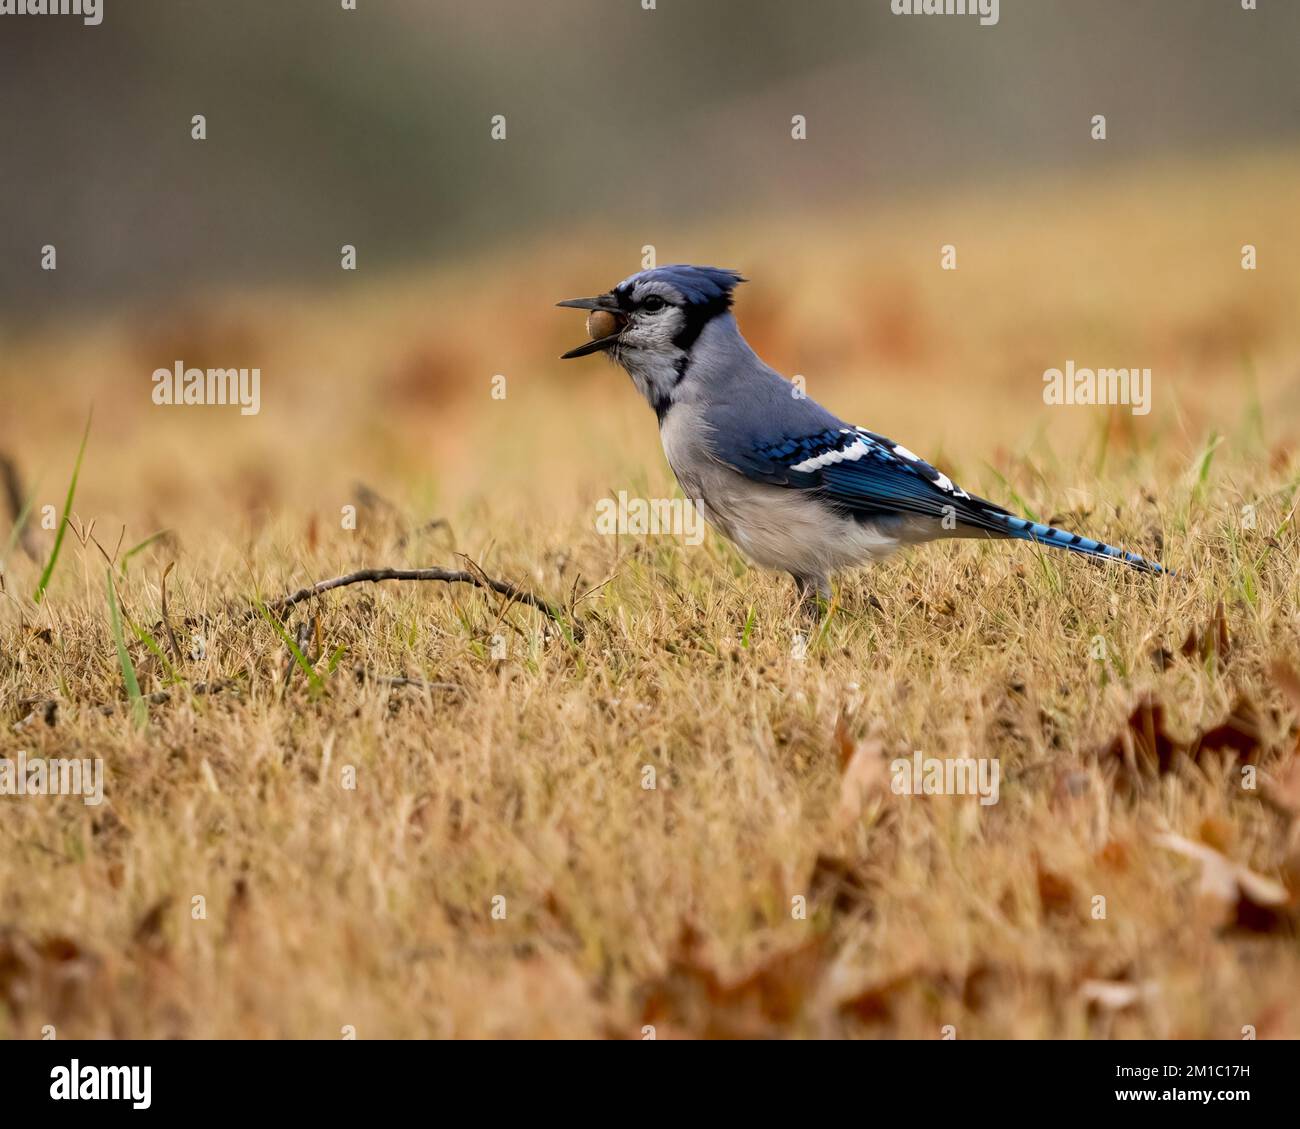 A selective focus shot of a Blue Jay bird in a field Stock Photo